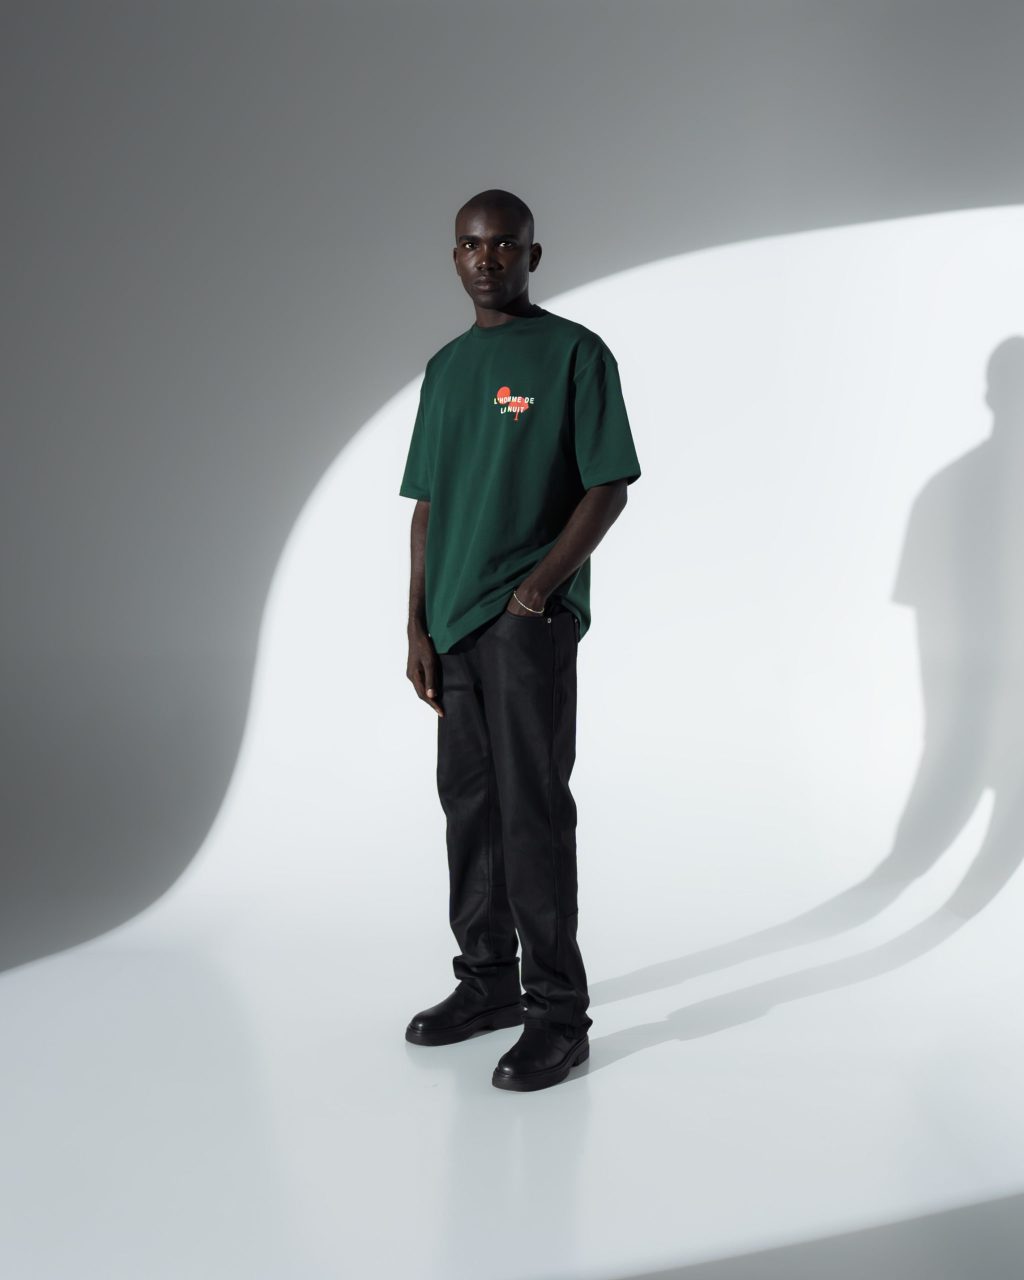 Streetwear brand Don't Waste Culture is ditching its online-only strategy: "Physical retail now offers us growth opportunities"